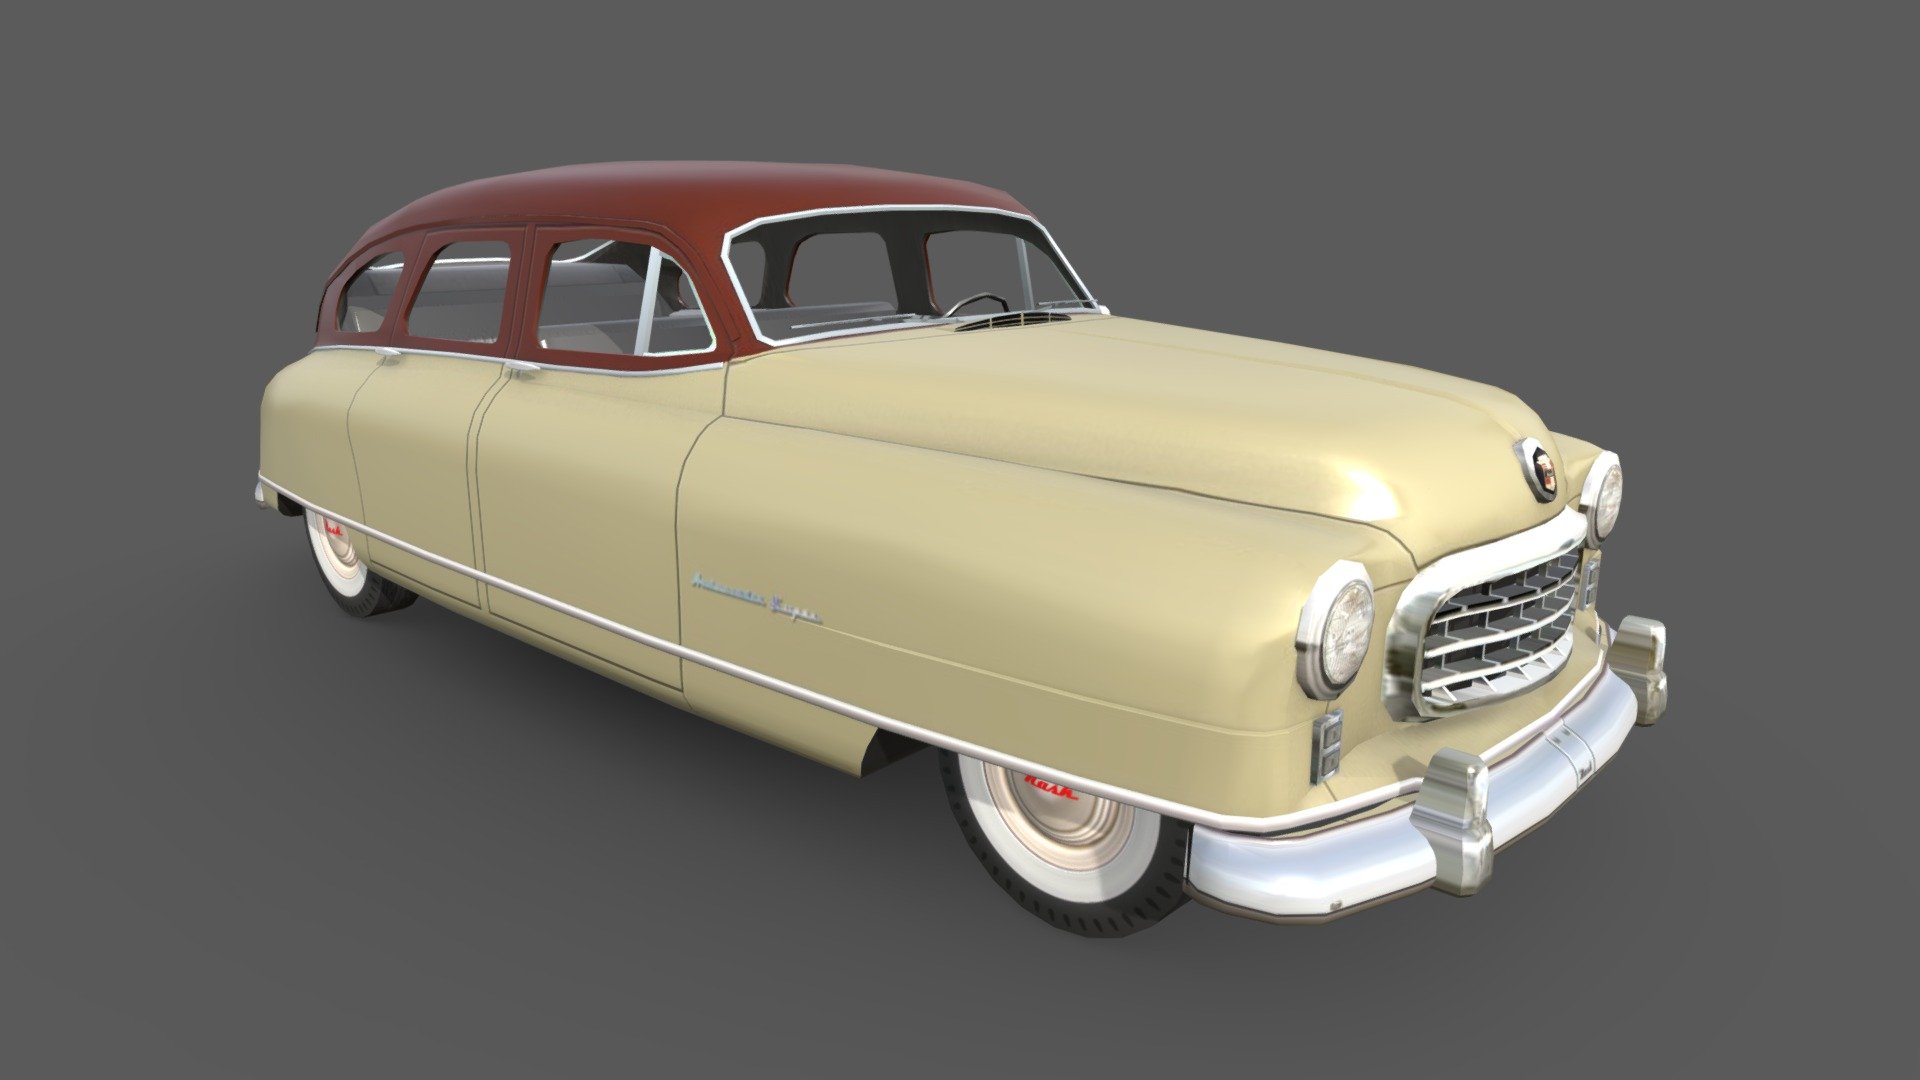 Here's a 1950 Nash Ambassado.  I like modeling oddballs things.  I frequently don't have blueprints to work with, but I work hard to keep the model as accurate as possible 3d model